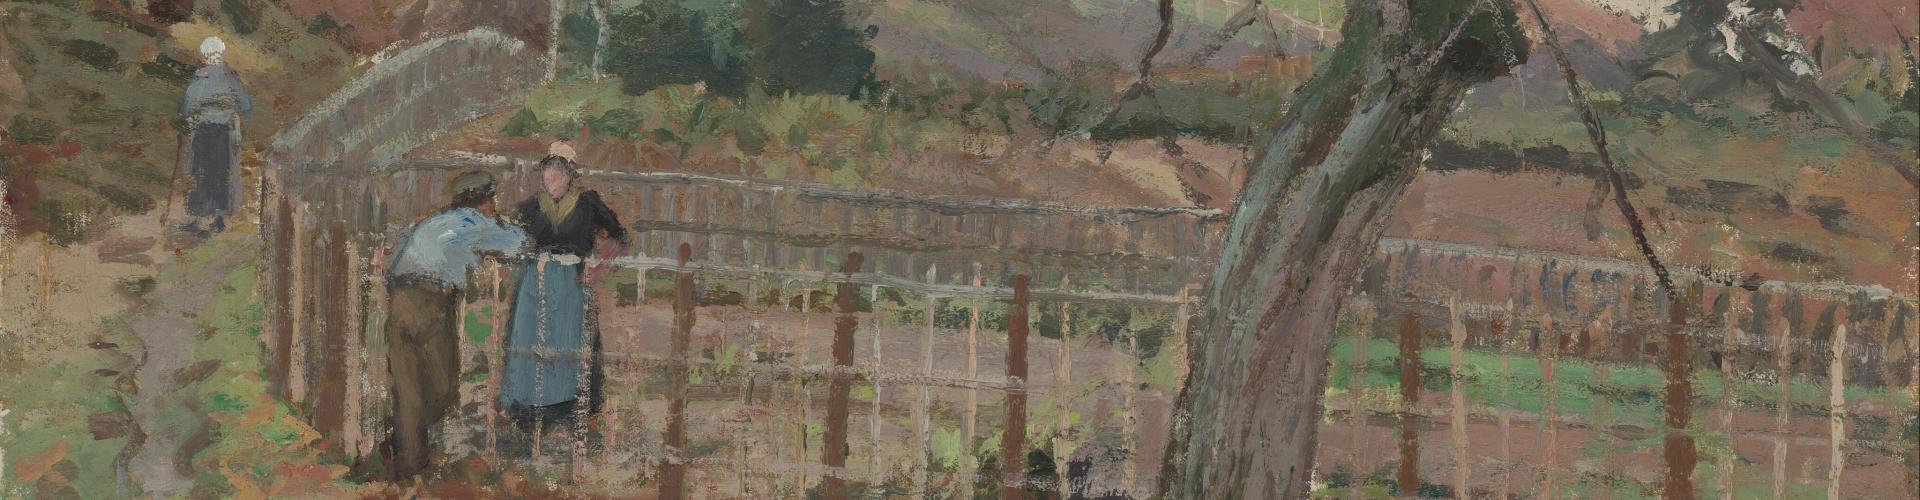 Impressionist painting depicting two people talking across a fence.